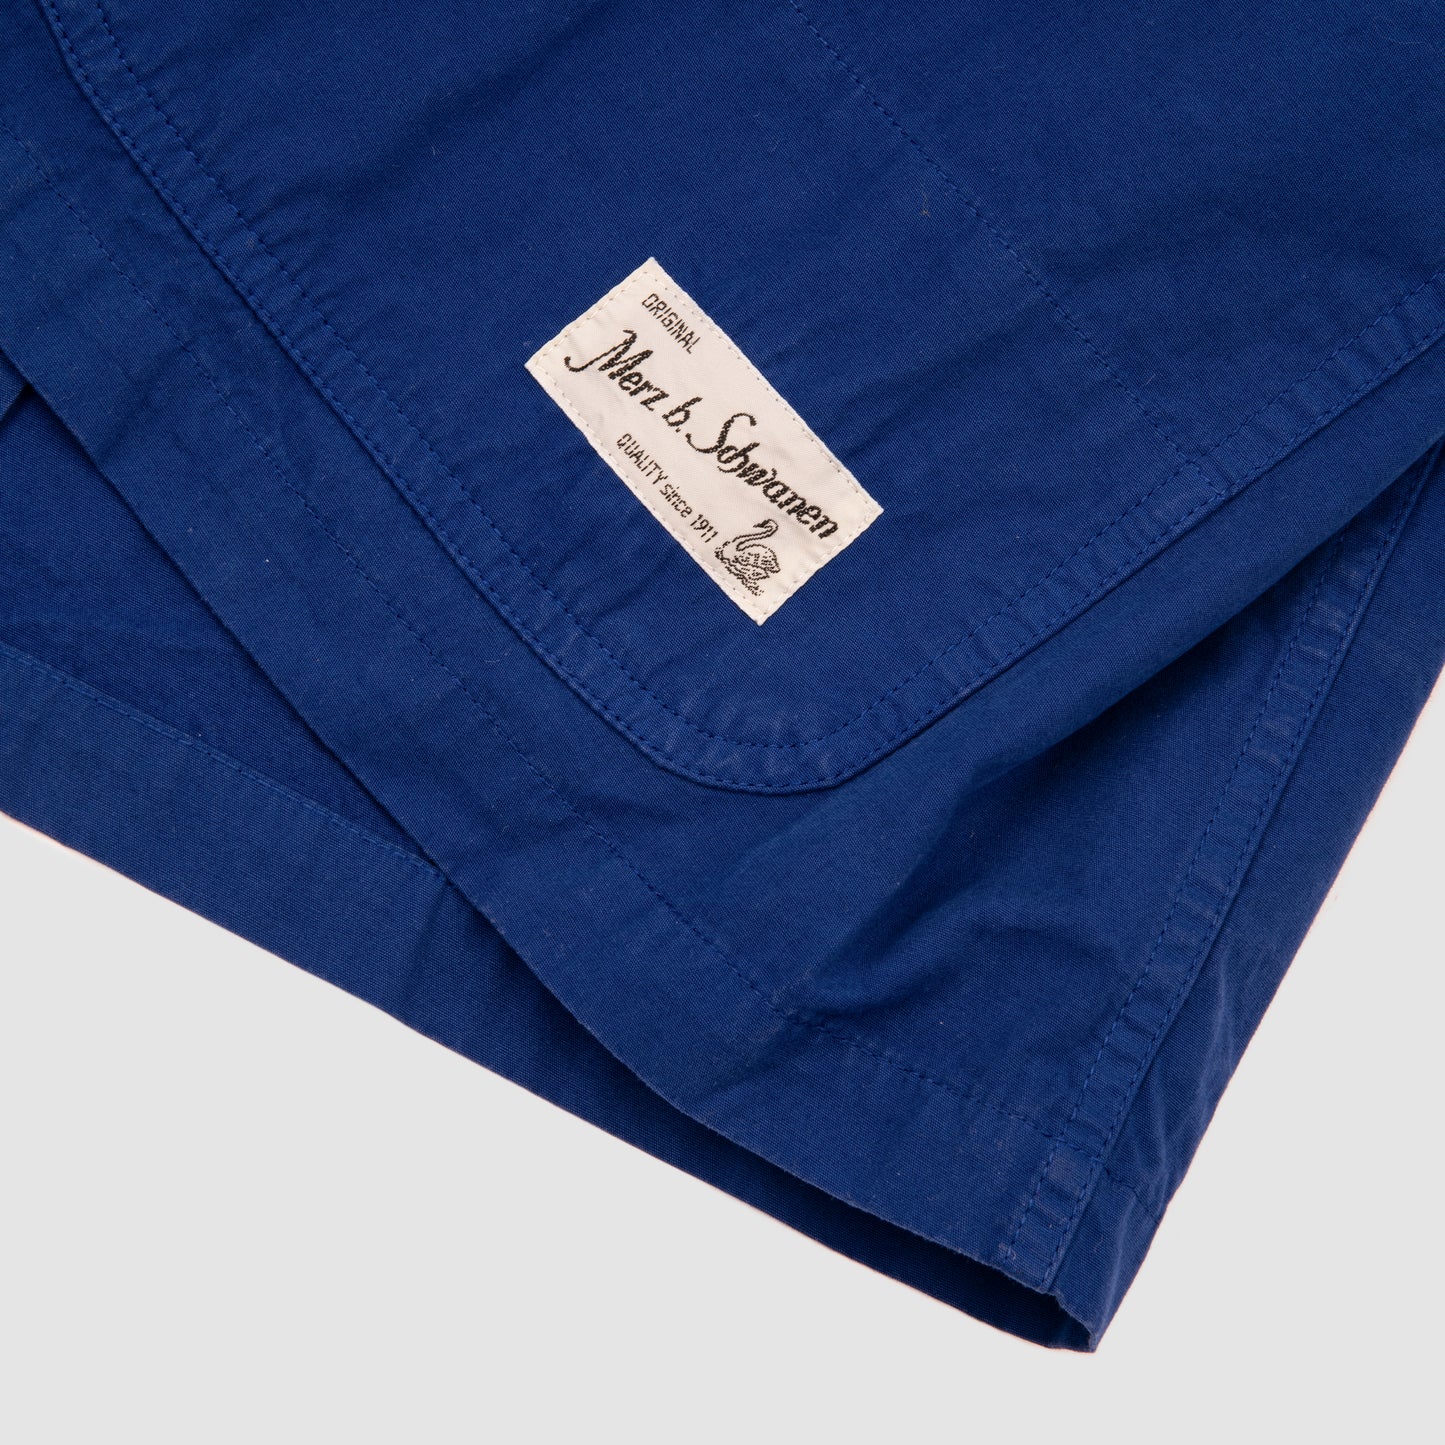 Organic Cotton Poplin Relaxed Fit Jacket - Vintage Blue